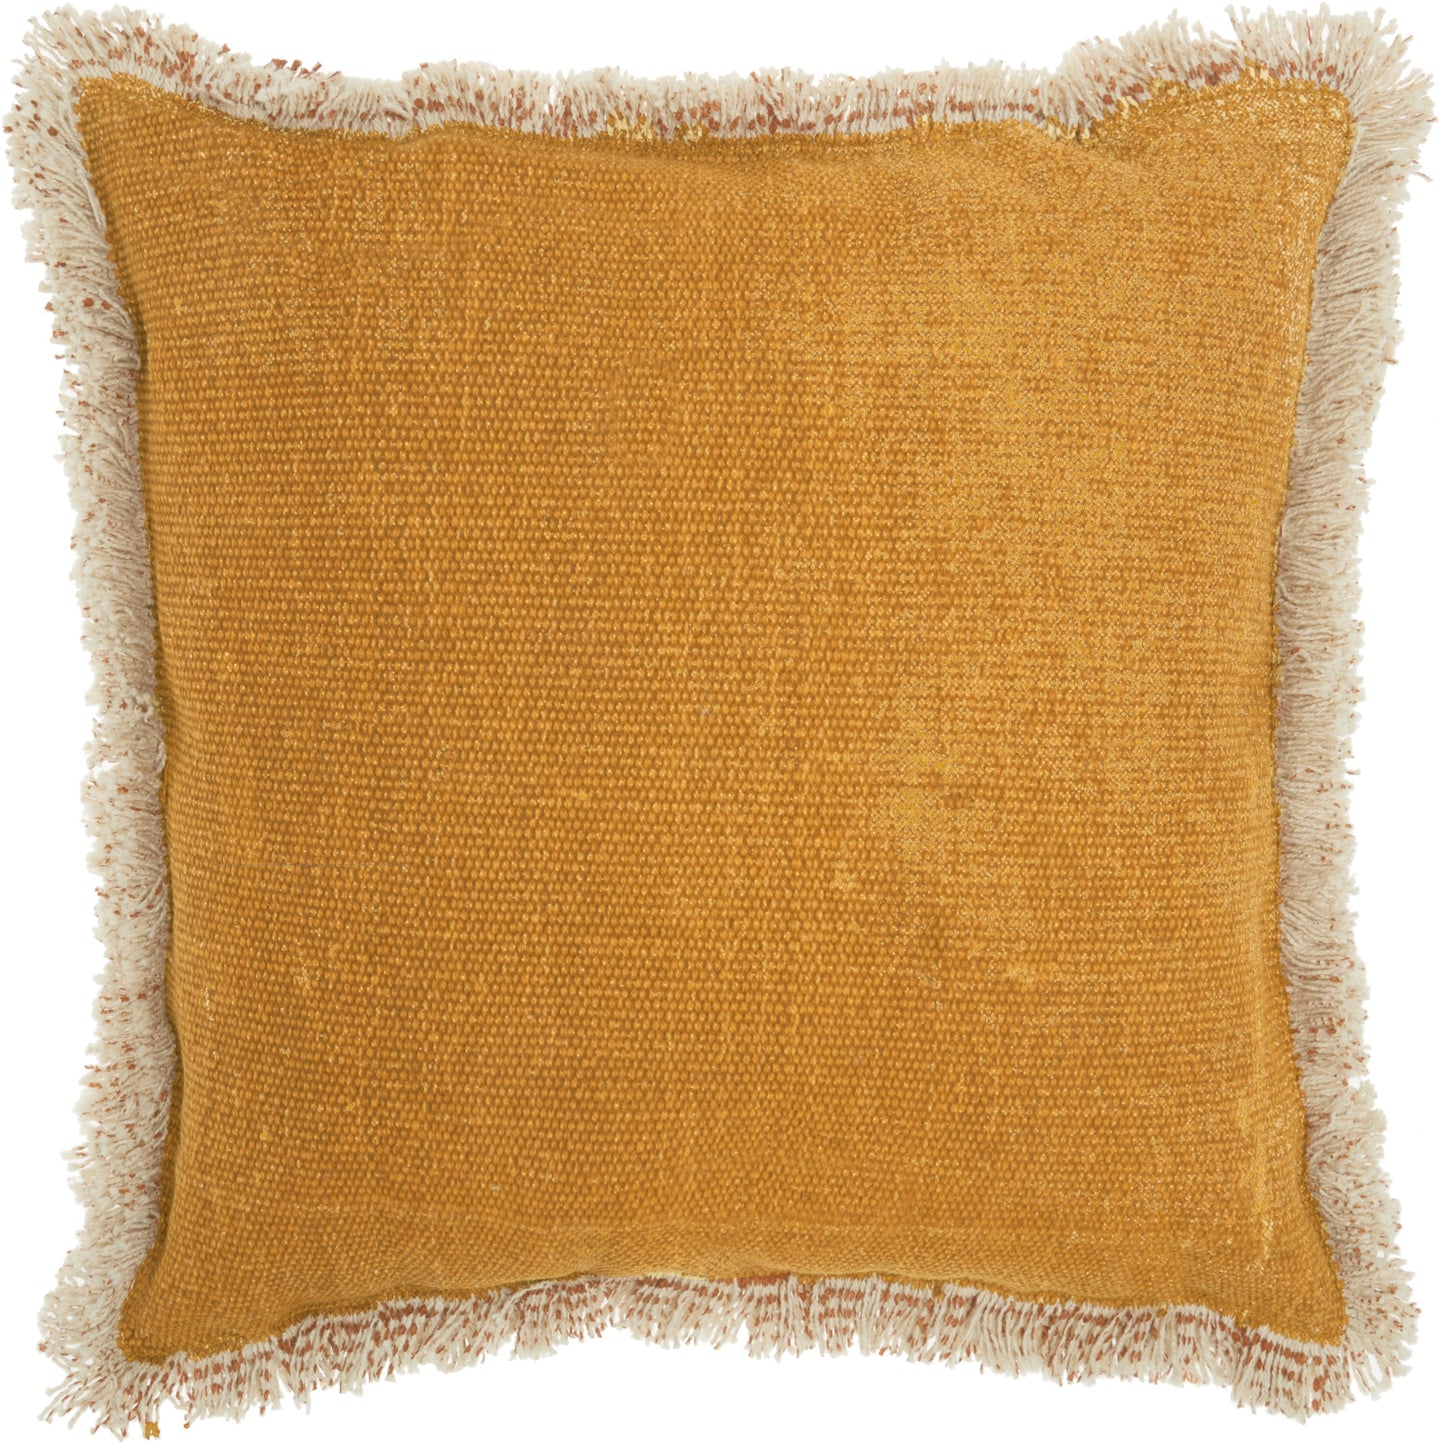 Life Styles AS301 Cotton Stonewash W/ Fringe Throw Pillow From Mina Victory By Nourison Rugs